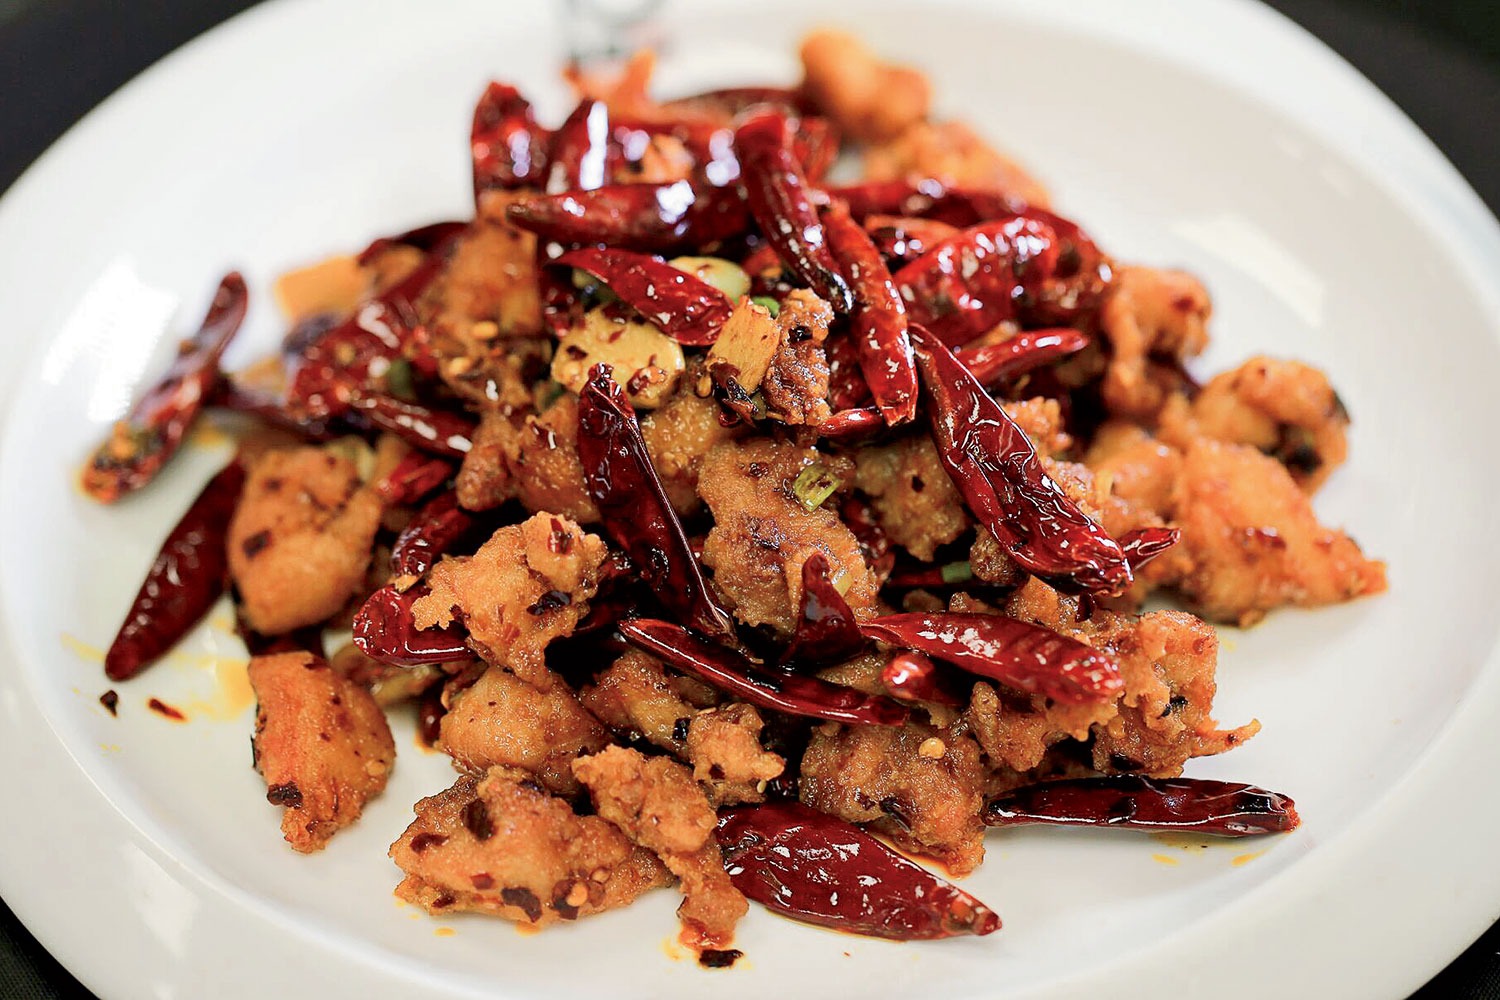 Chef’s Special Dry Chili Chicken at Lao Sze Chuan